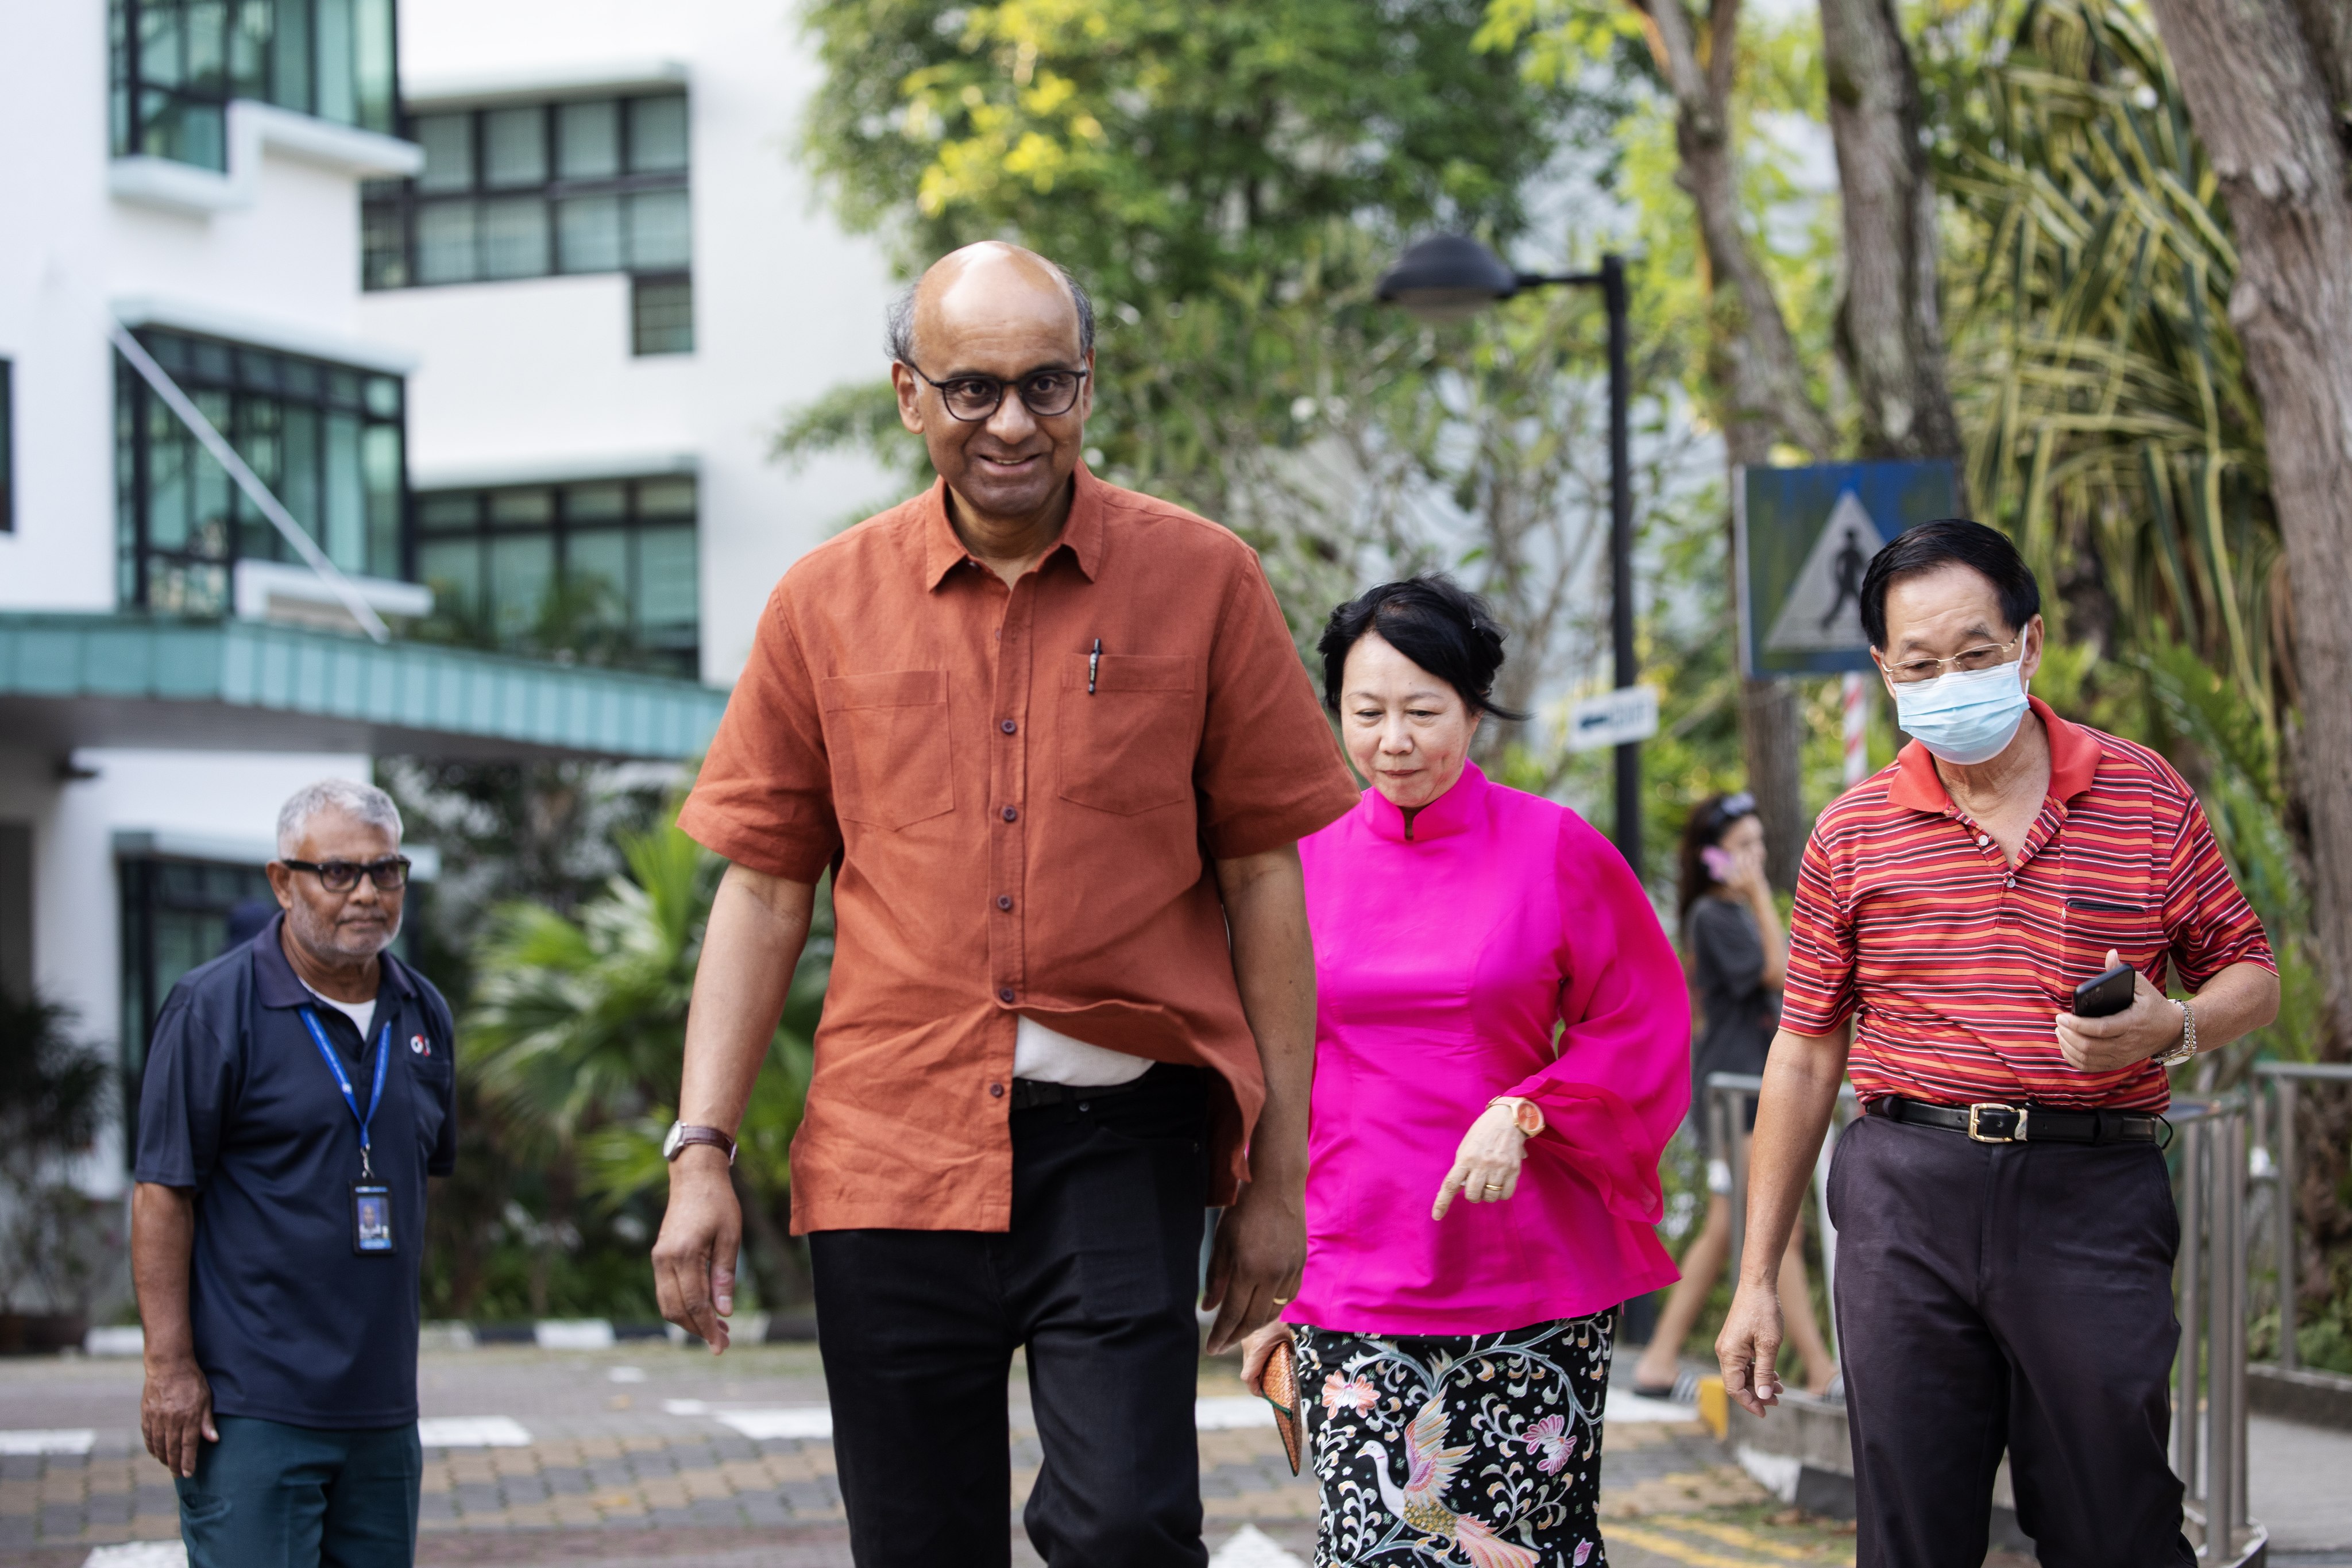 Singaporean presidential election victor Tharman Shanmugaratnam and his wife, Jane Yumiko Ittogi, leave a polling station after casting their votes on September 1. He is the first non-Chinese candidate to win a constested presidential election. Photo: EPA-EFE